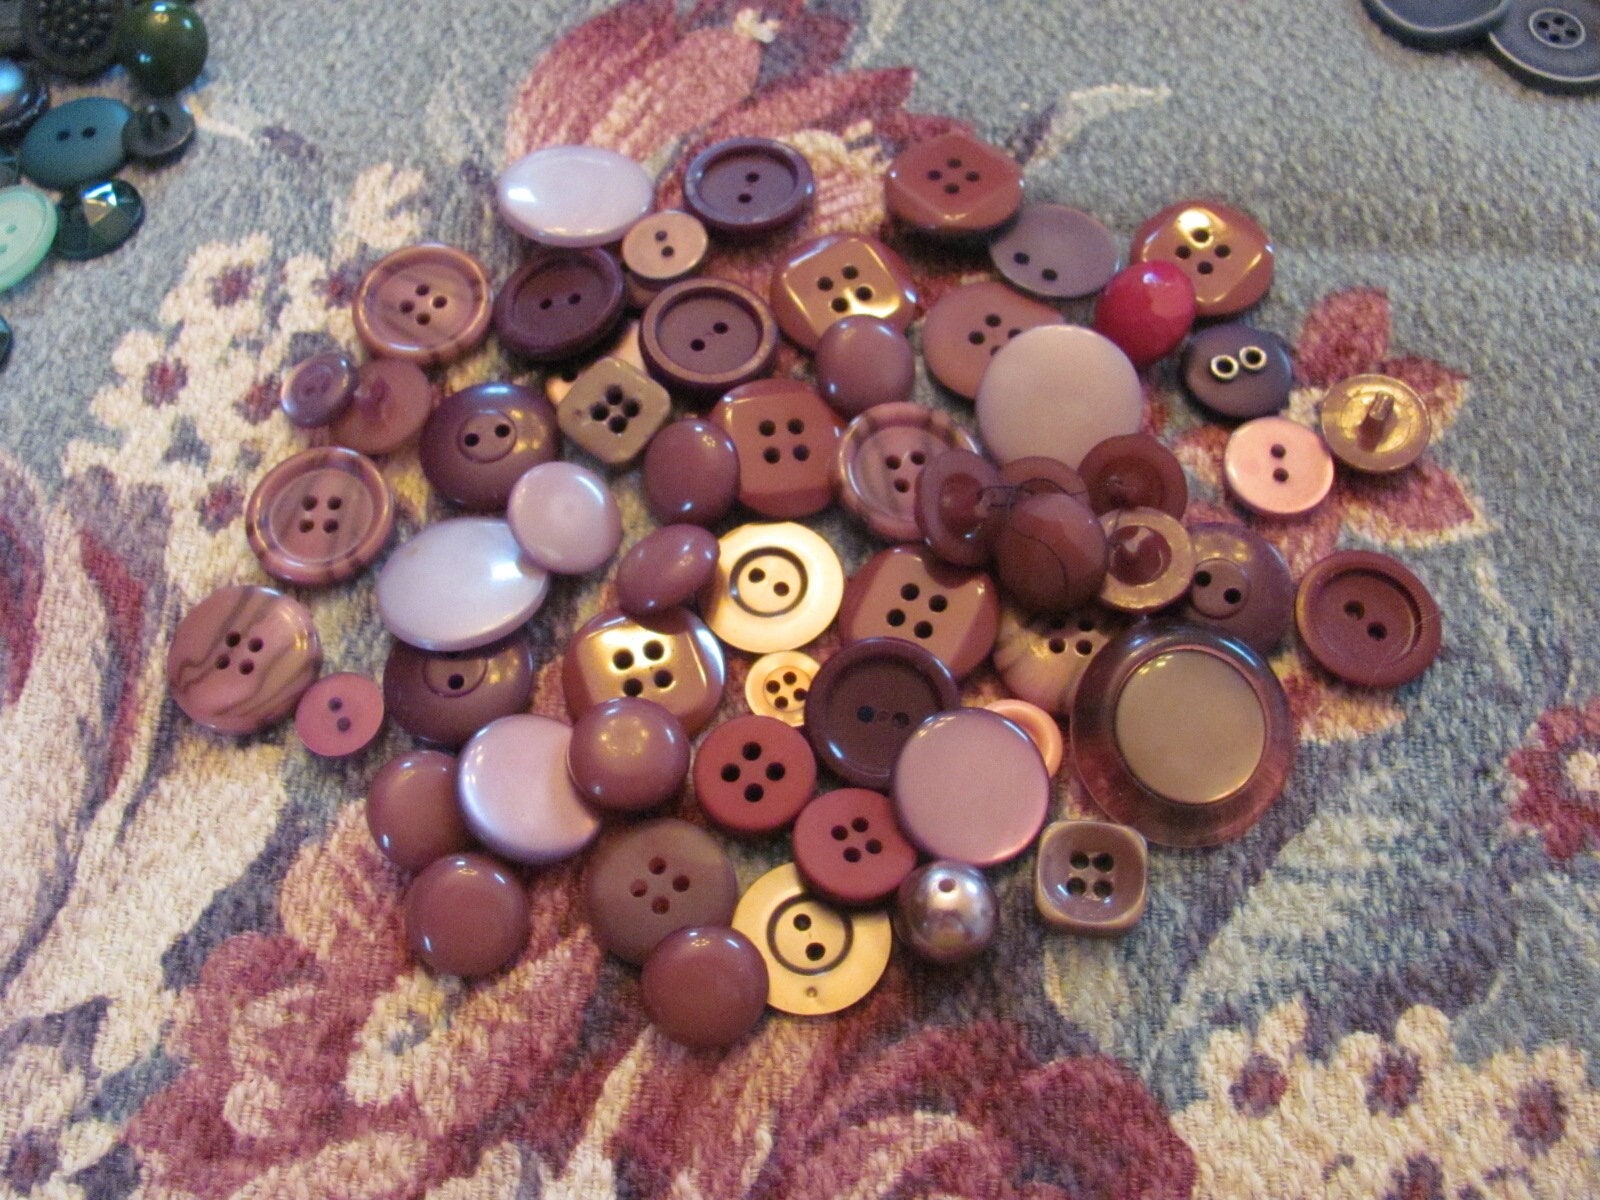 60g Pack Plastic Buttons - Assorted Coloured & Sized Buttons